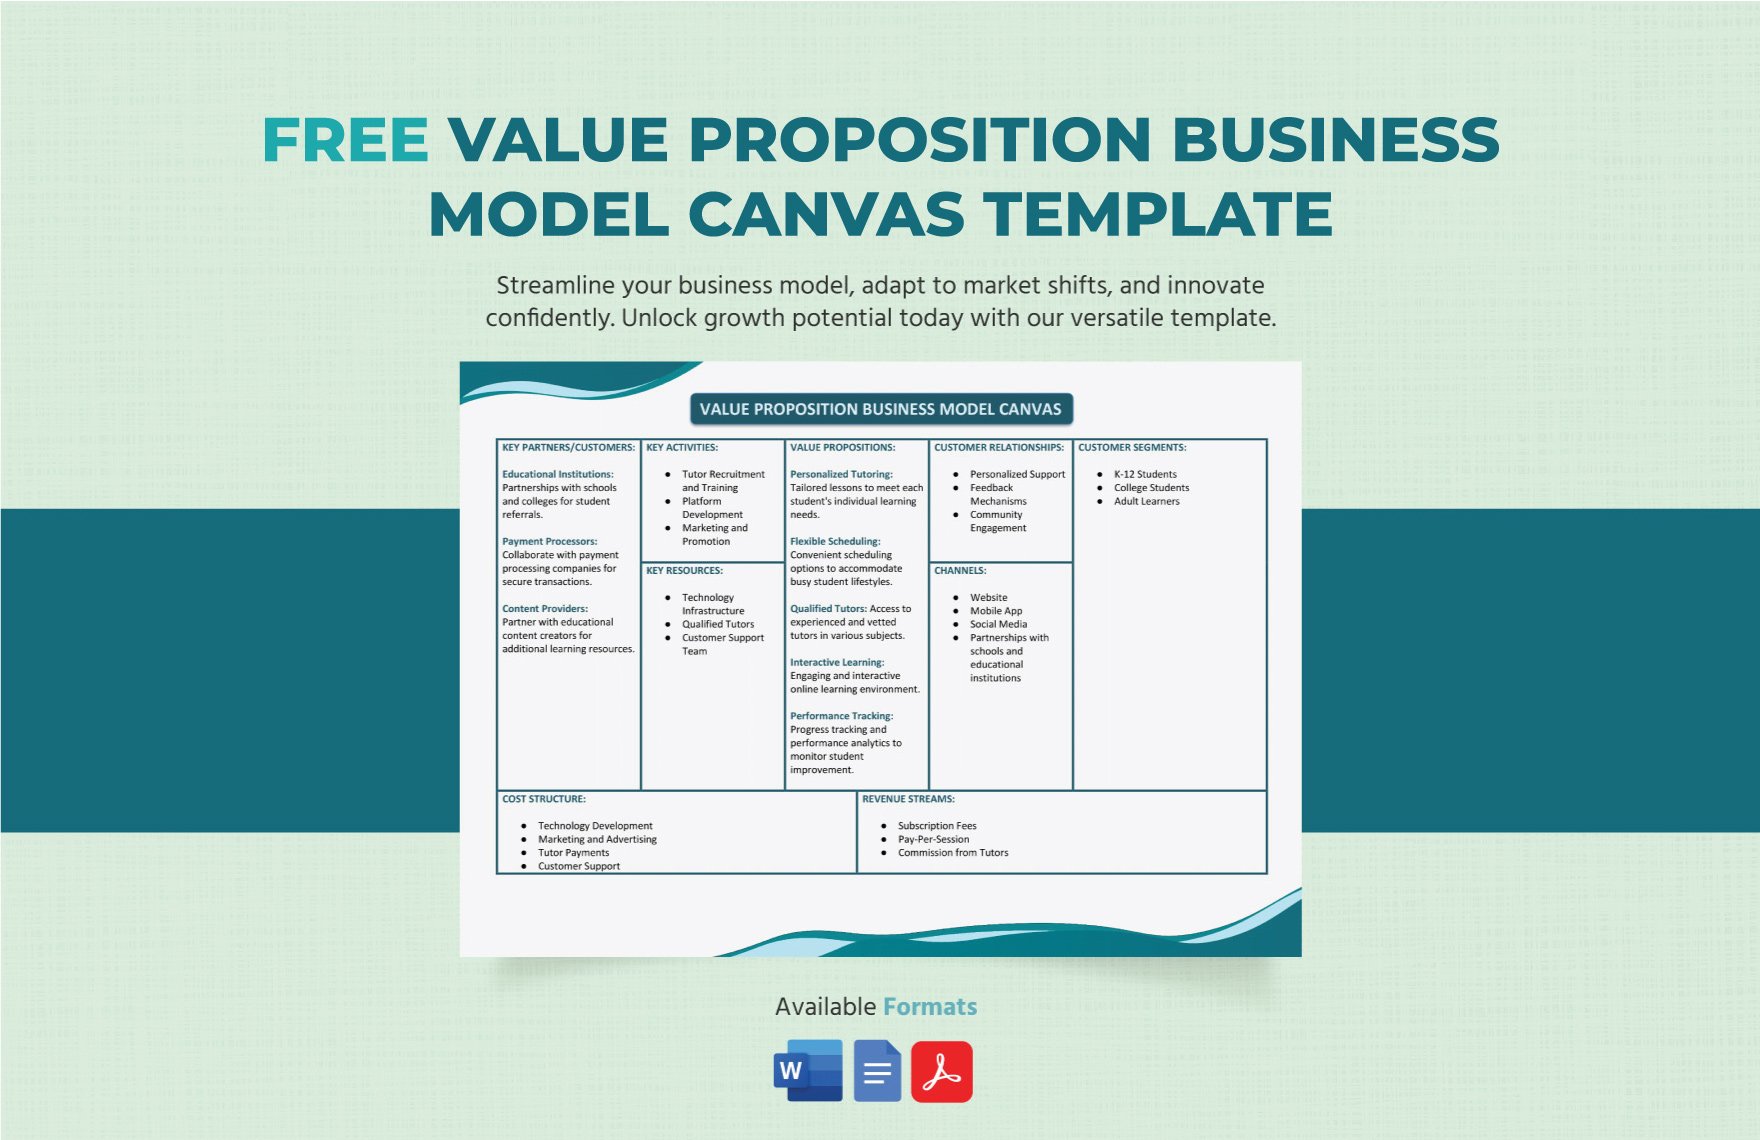 Free Value Proposition Business Model Canvas Template